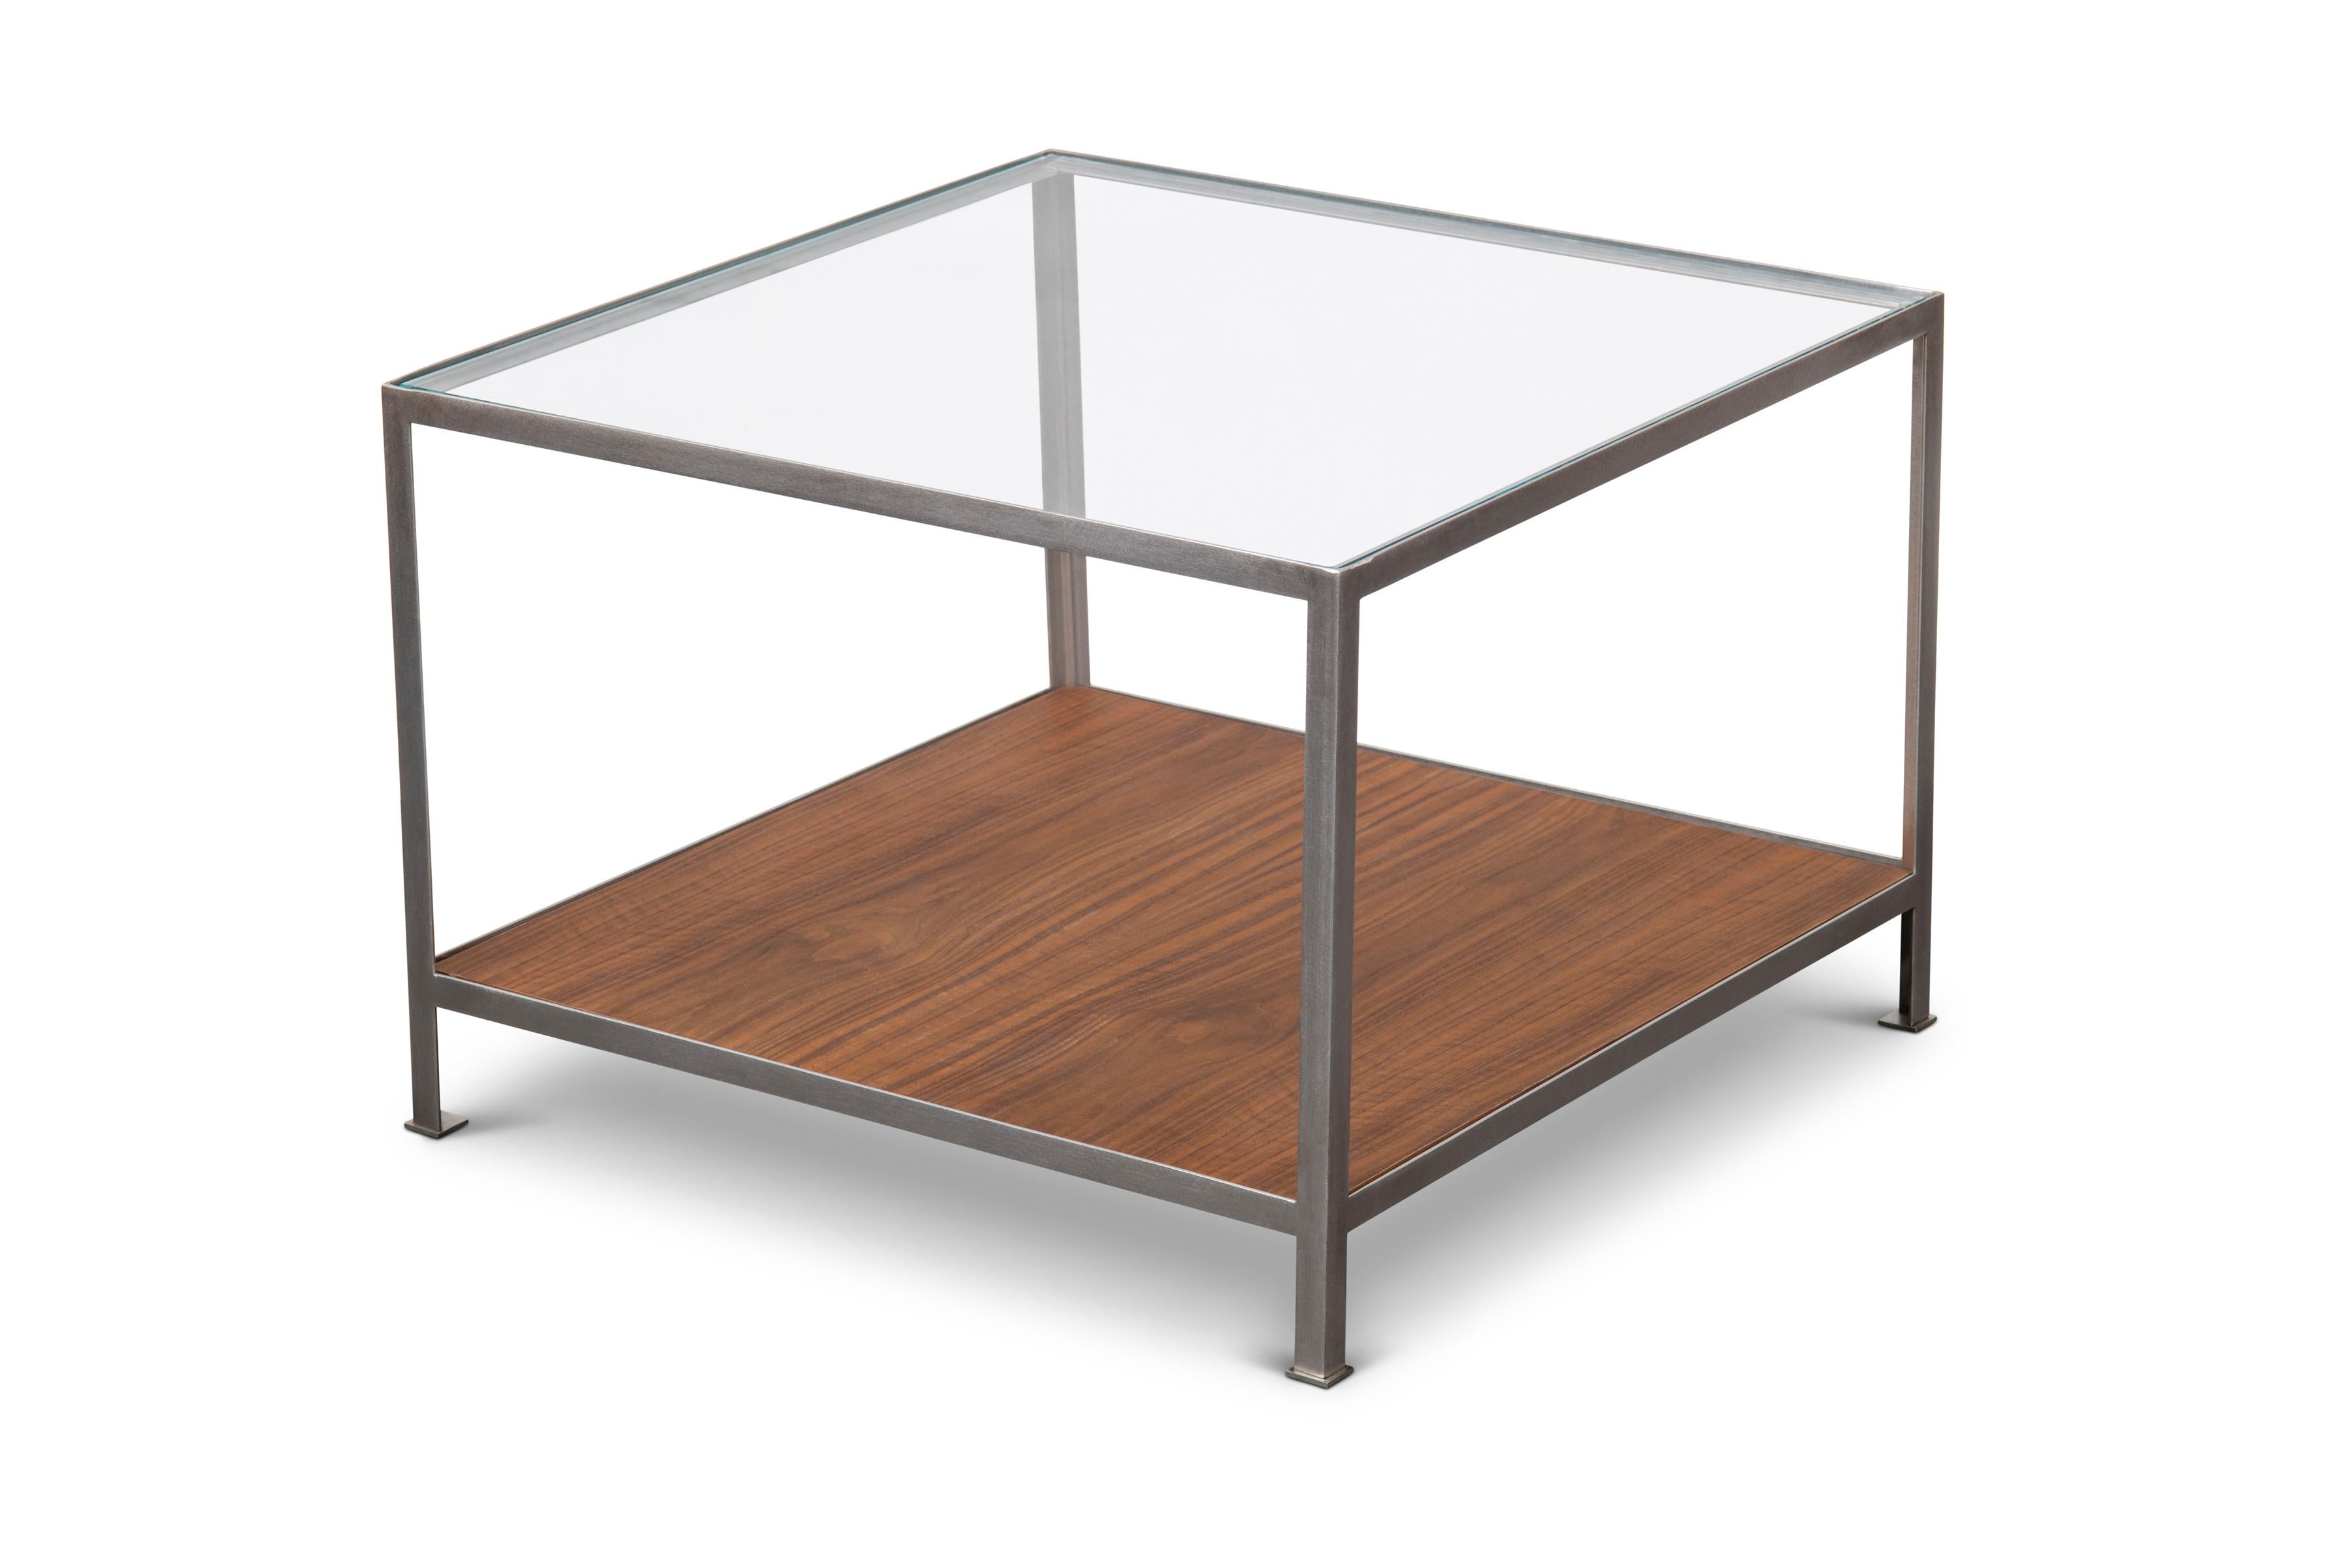 The Lineo table features a frame made of ¾